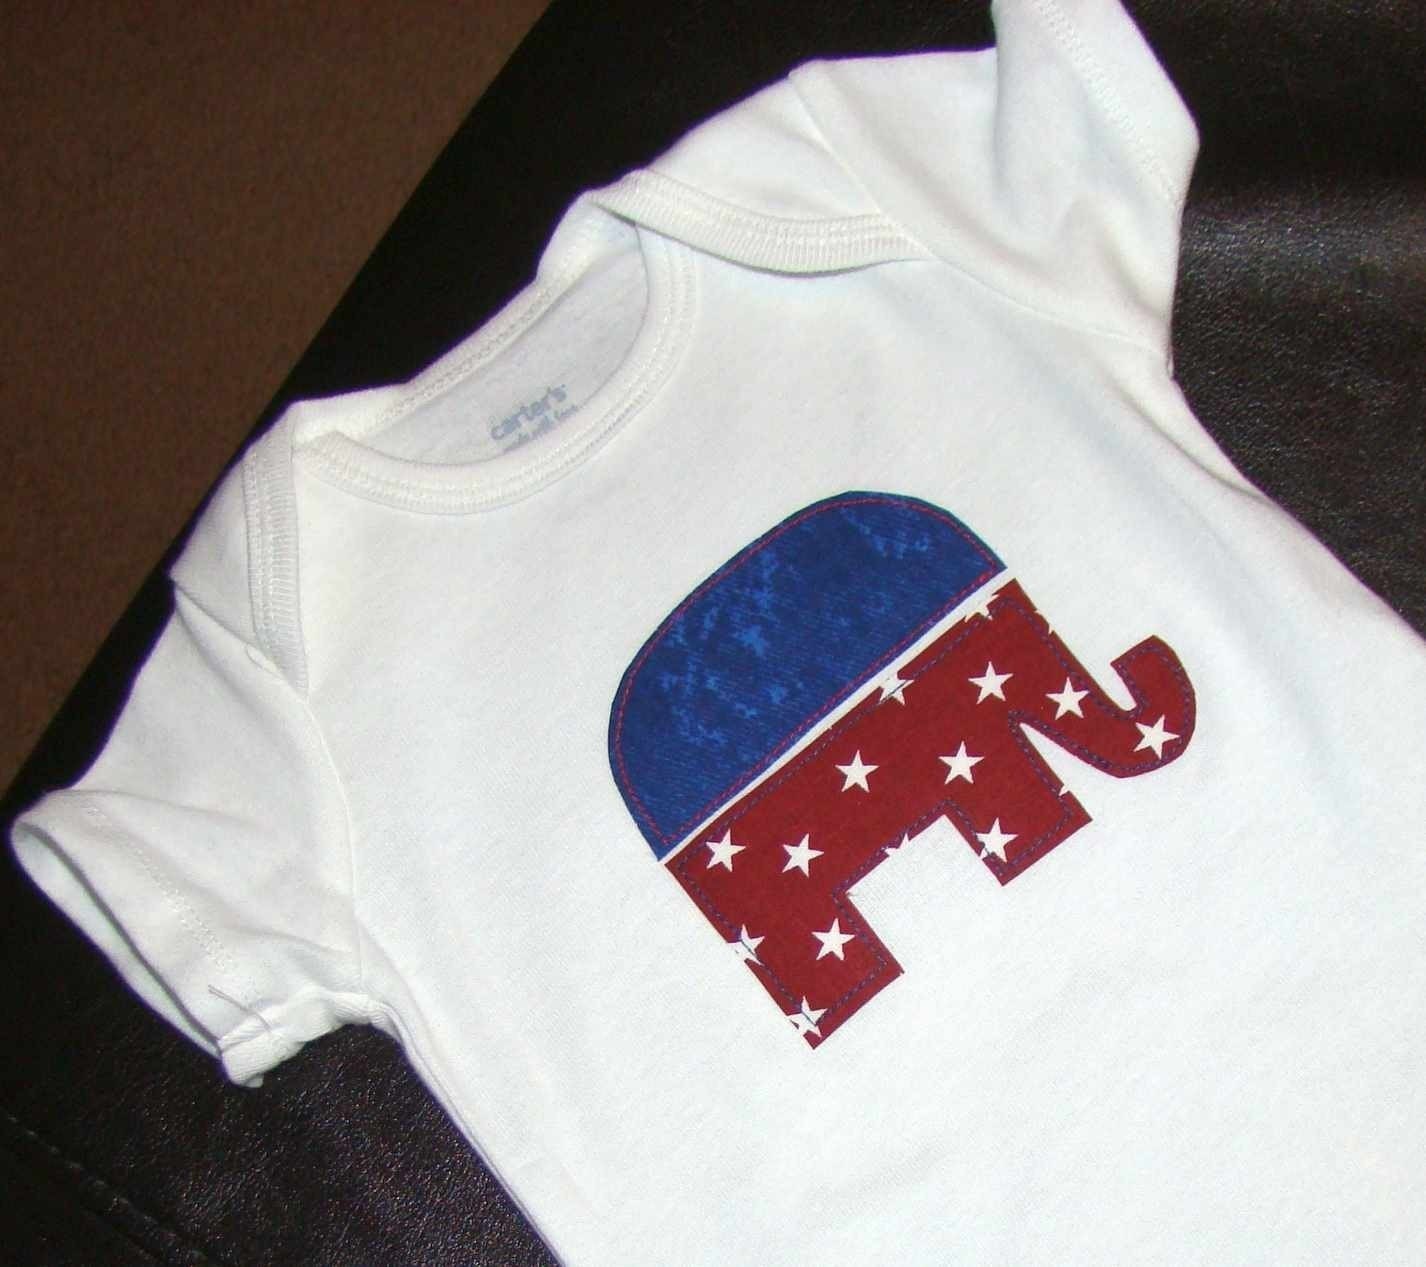 Red, White, and Blue Republican Elephant Onesie/Tee